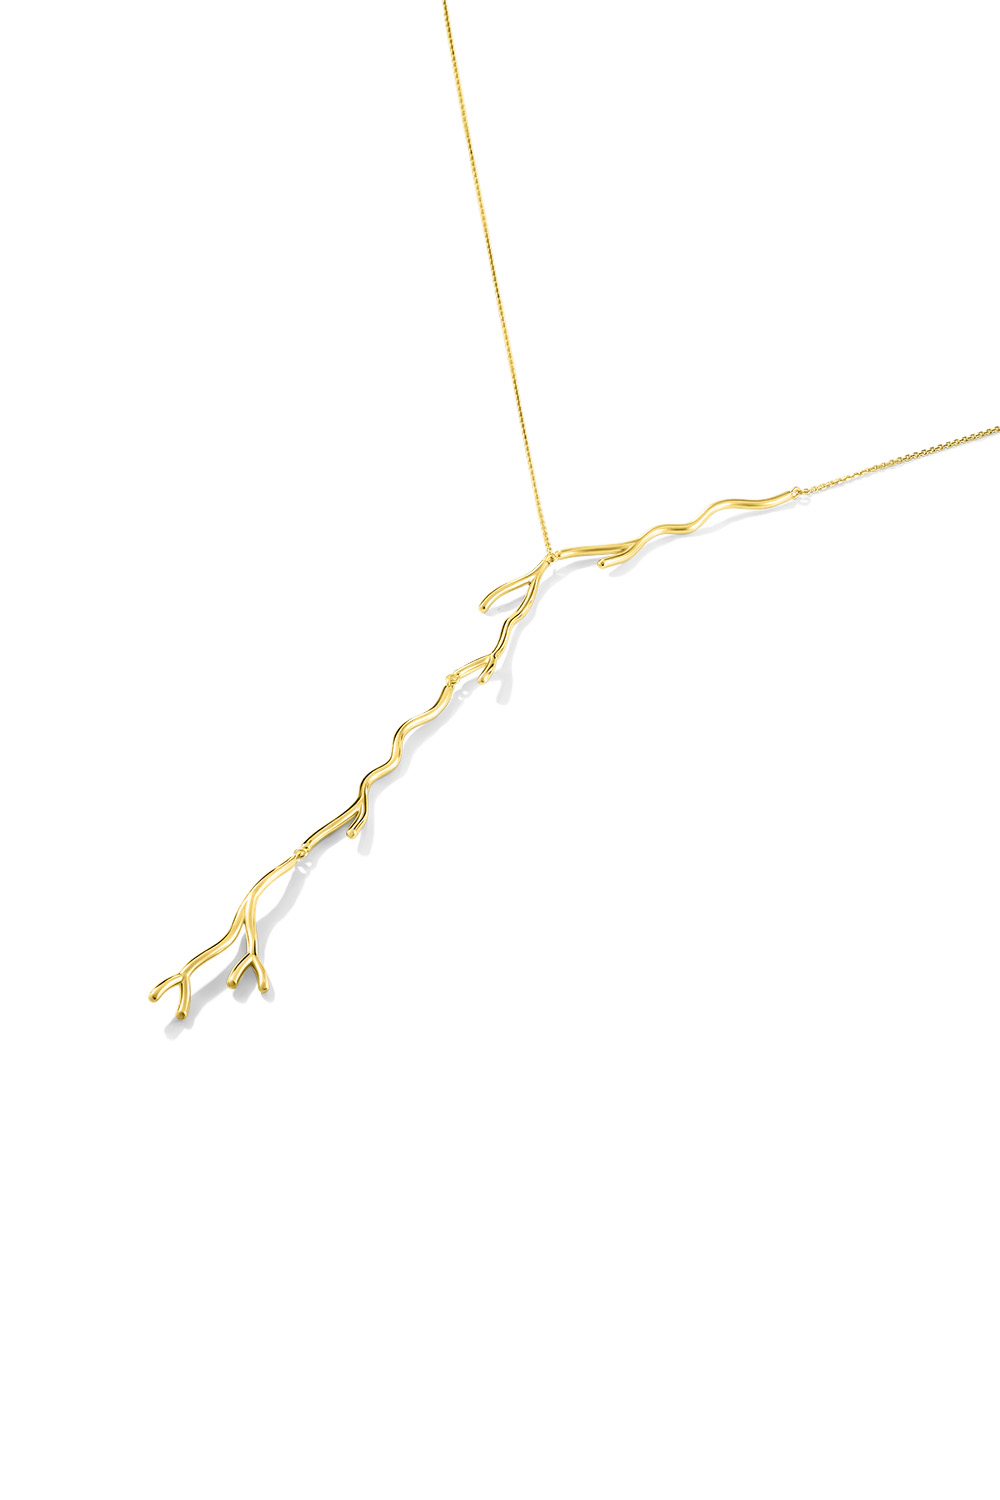 KORAL TIE NECKLACE YELLOW GOLD PLATED  